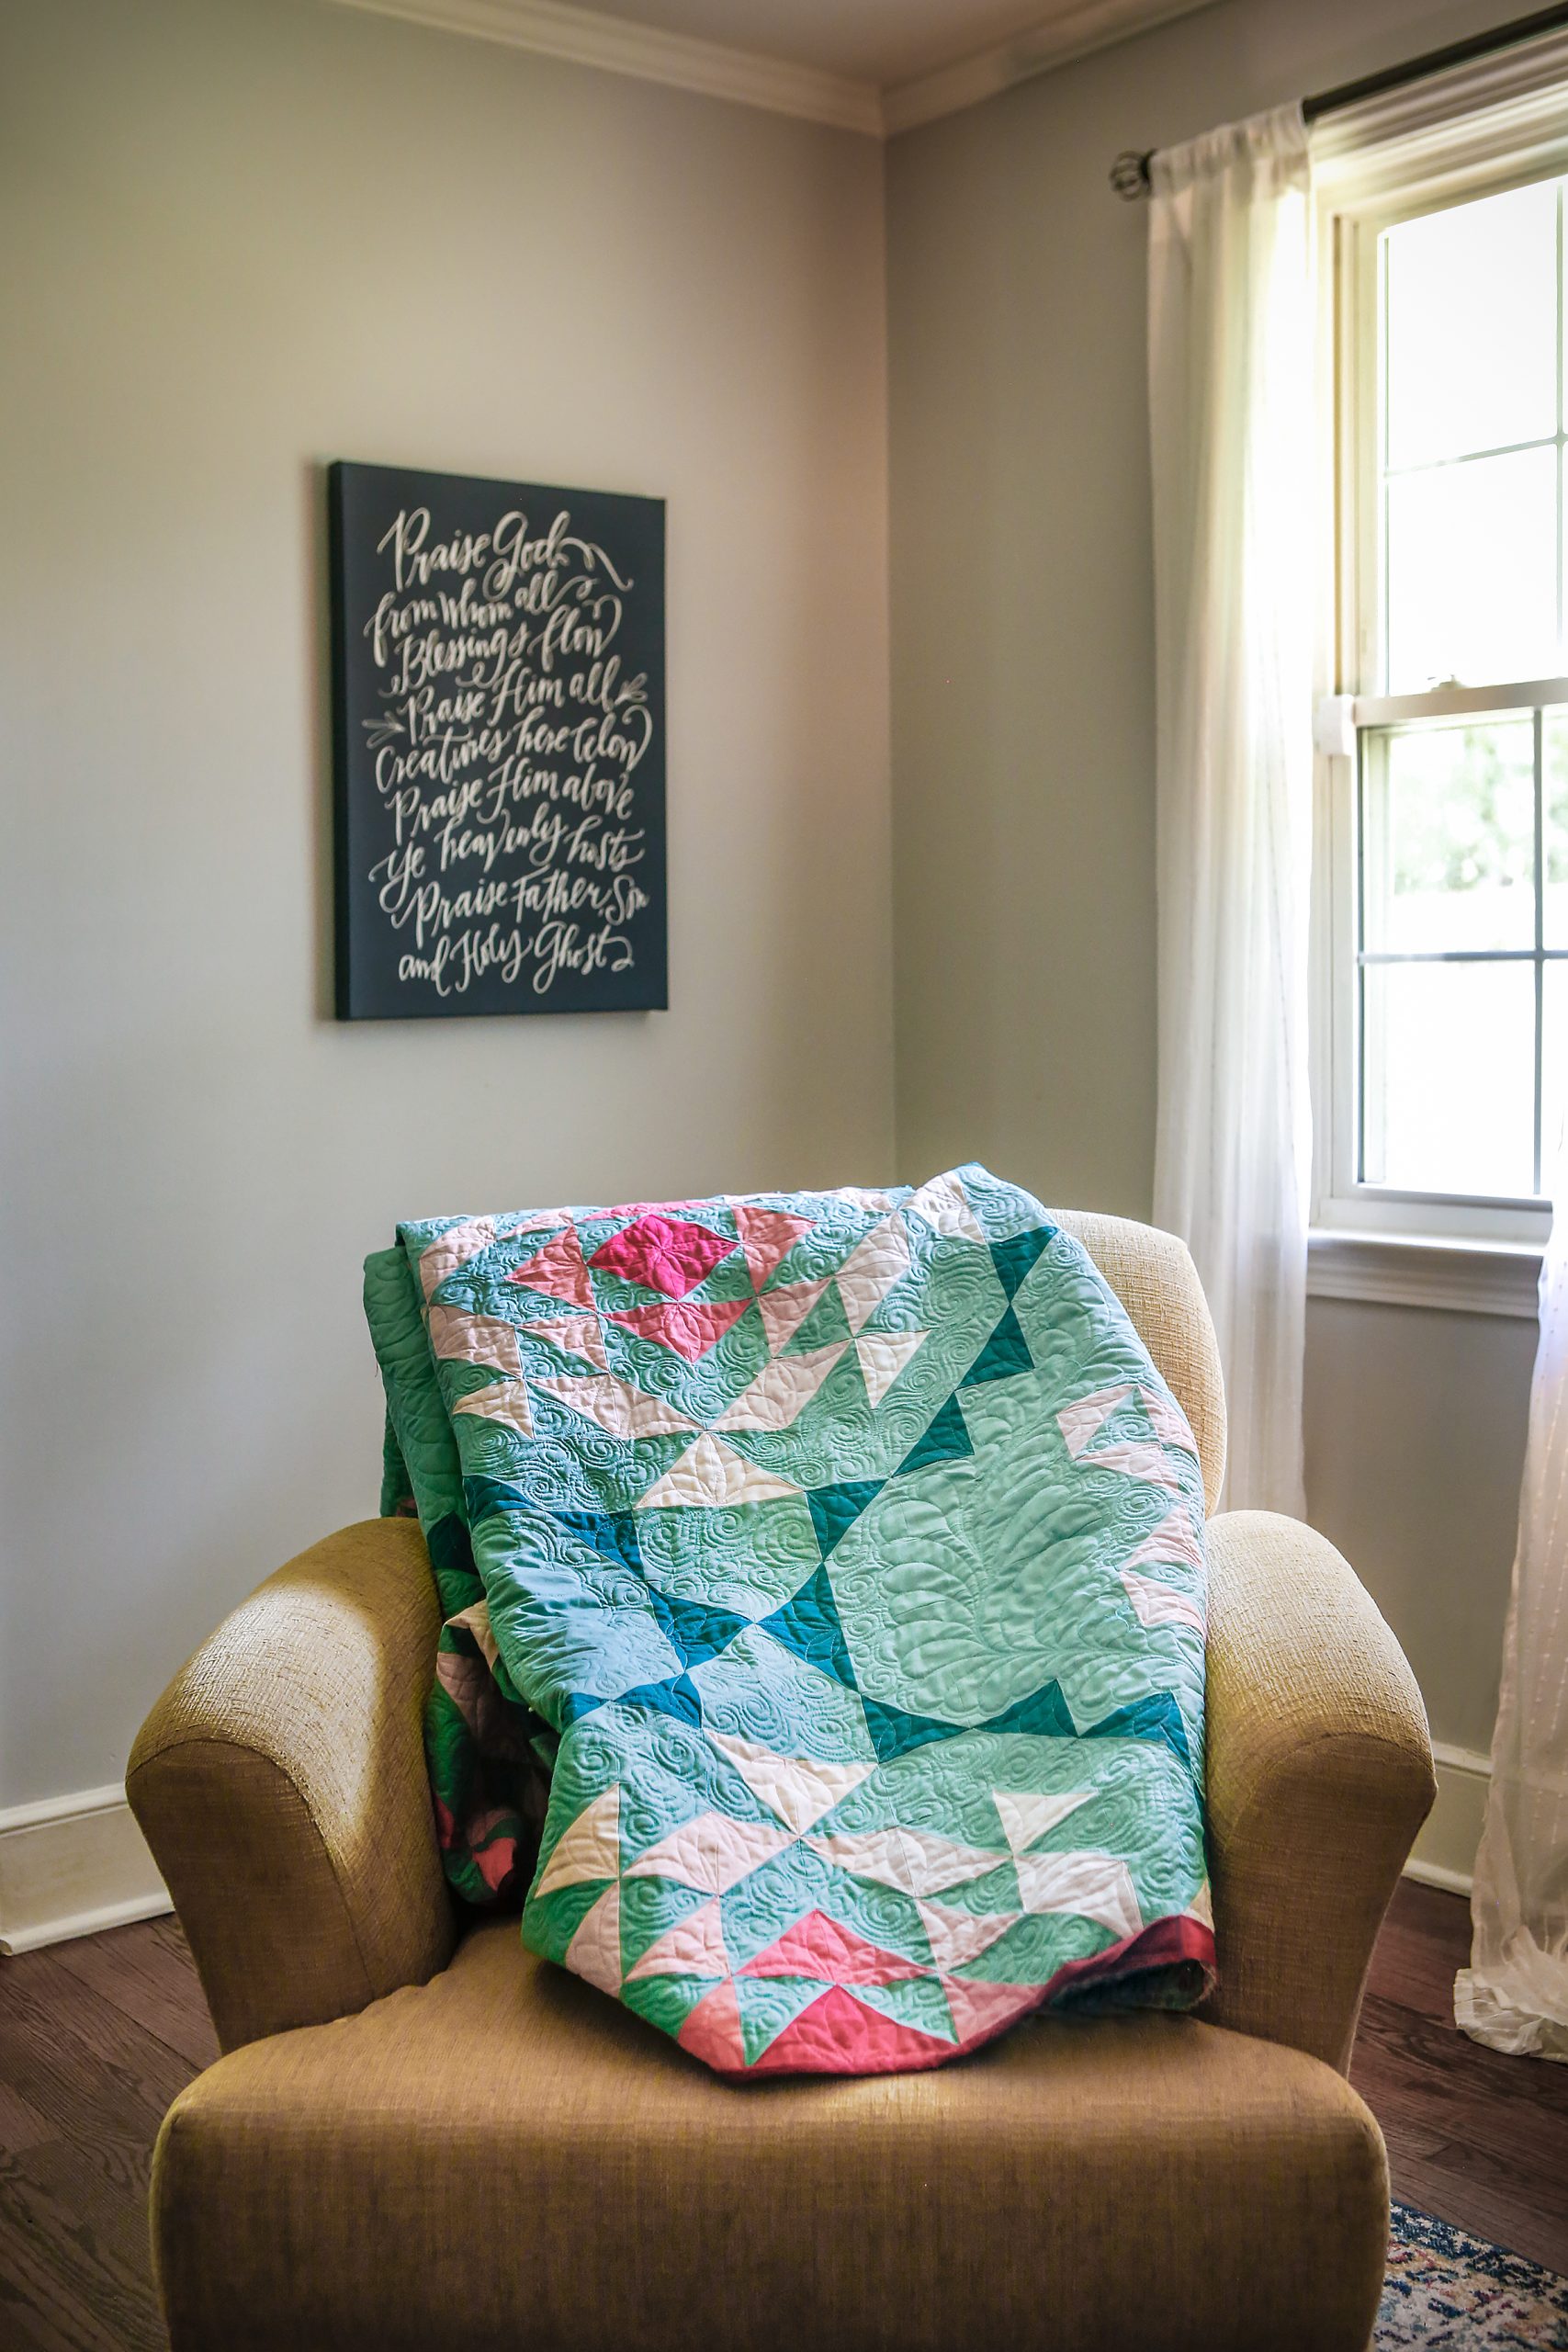 A beautiful example of custom quilting with feathers made by Kristy Rollins.